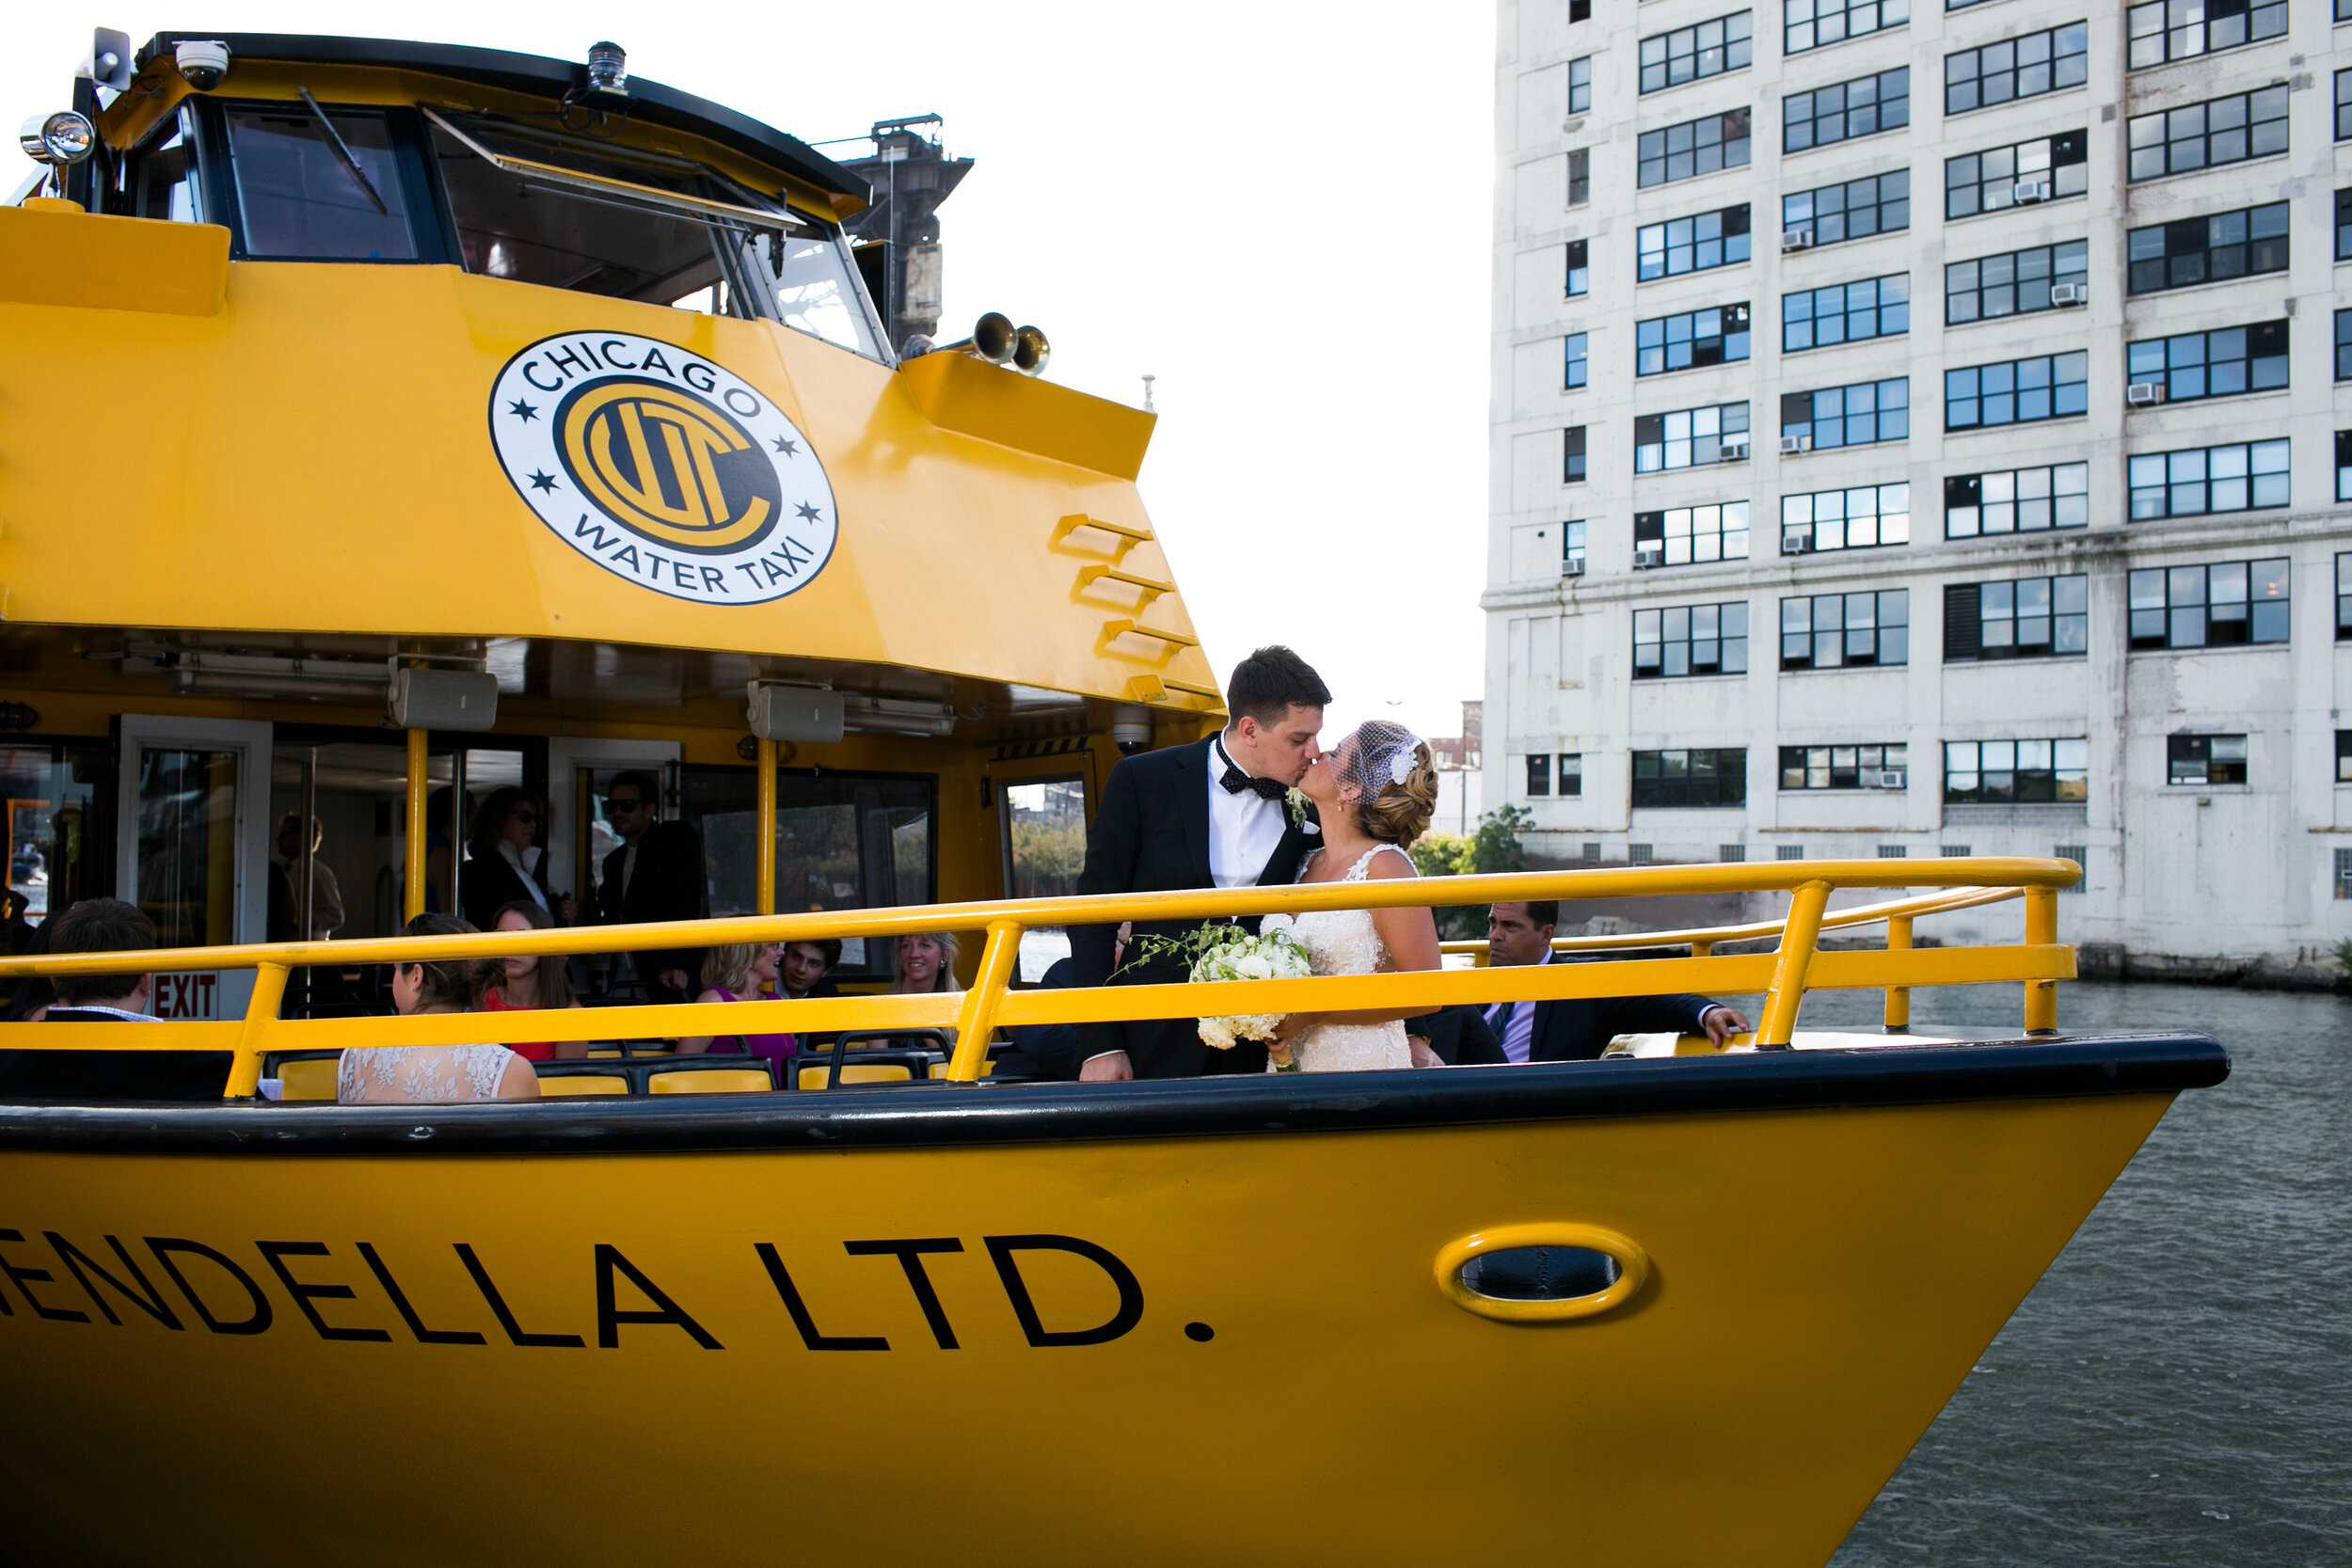 Alternative Chicago Wedding With a Water Taxi captured by Heather DeCamp Photography featured on CHI thee WED